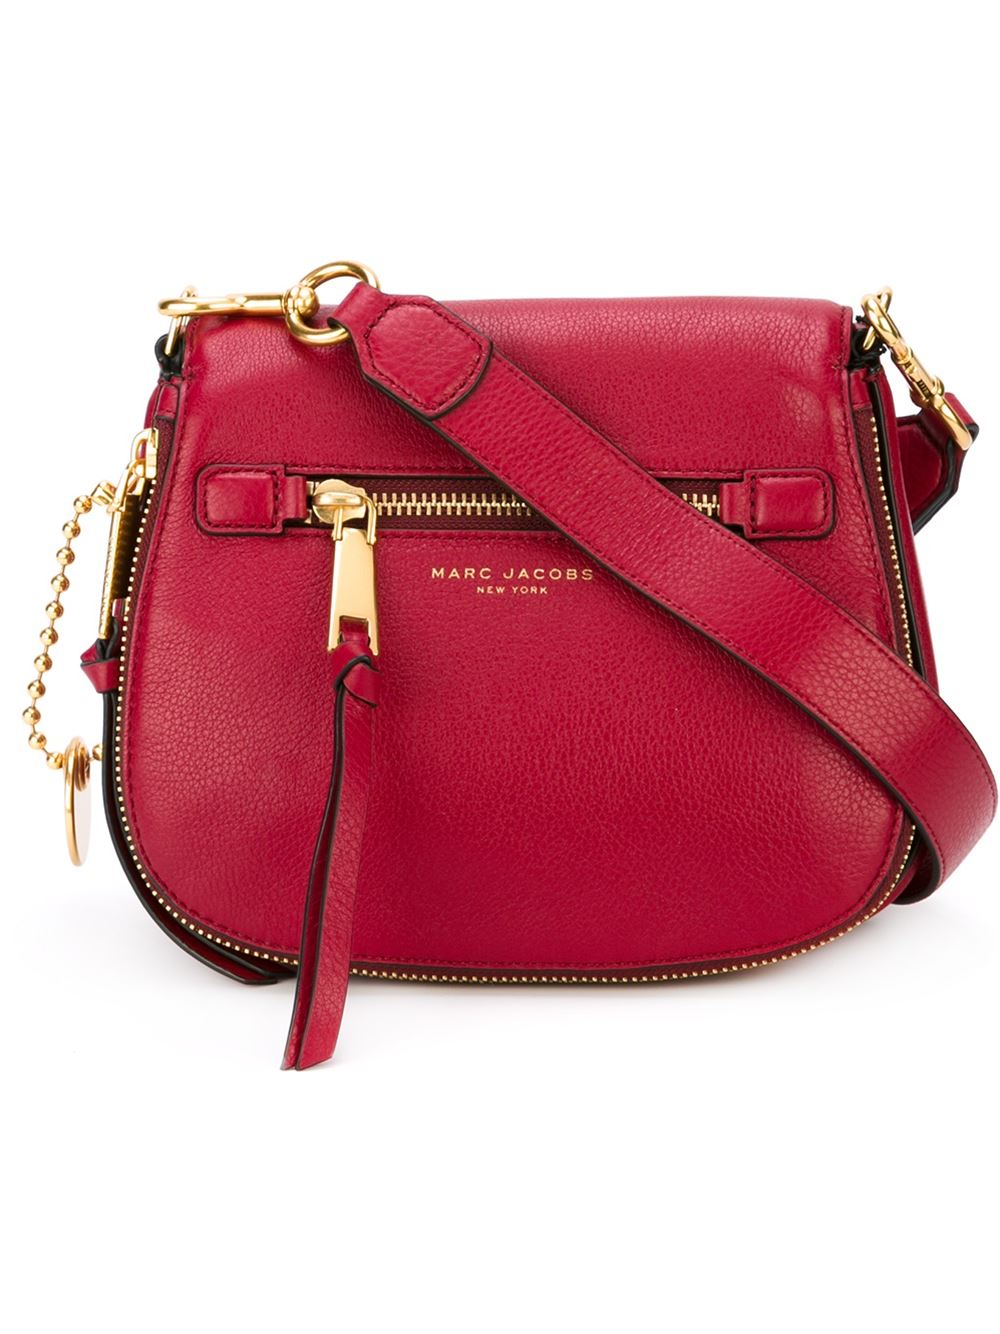 Lyst - Marc Jacobs Recruit Small Crossbody Bag in Red